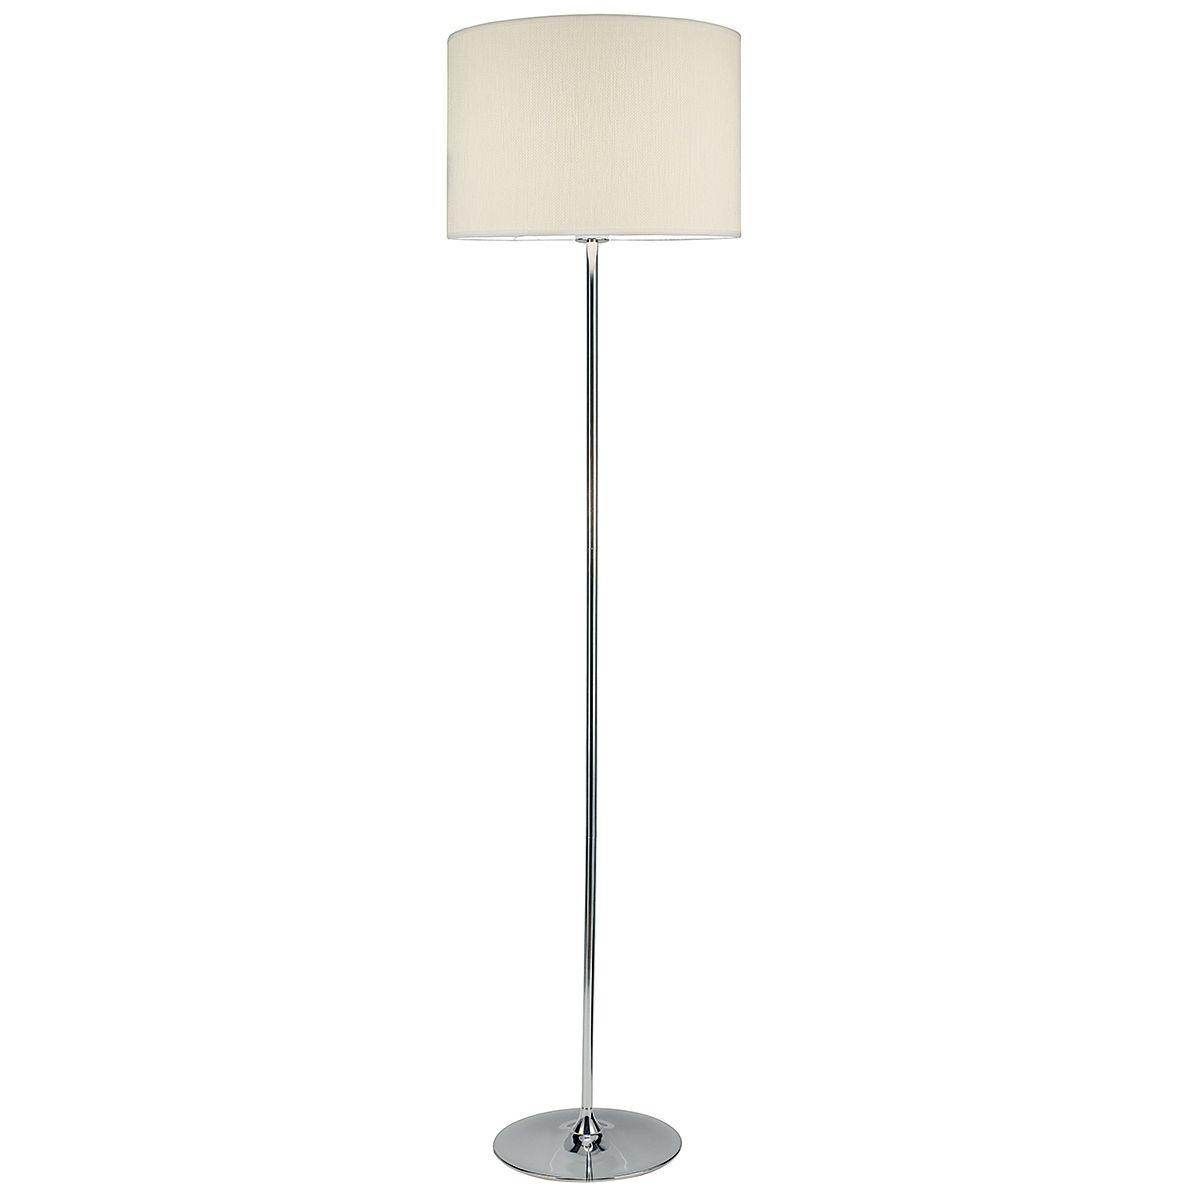 Dar Delta Floor Lamp Polished Chrome complete with Shade - Cusack Lighting